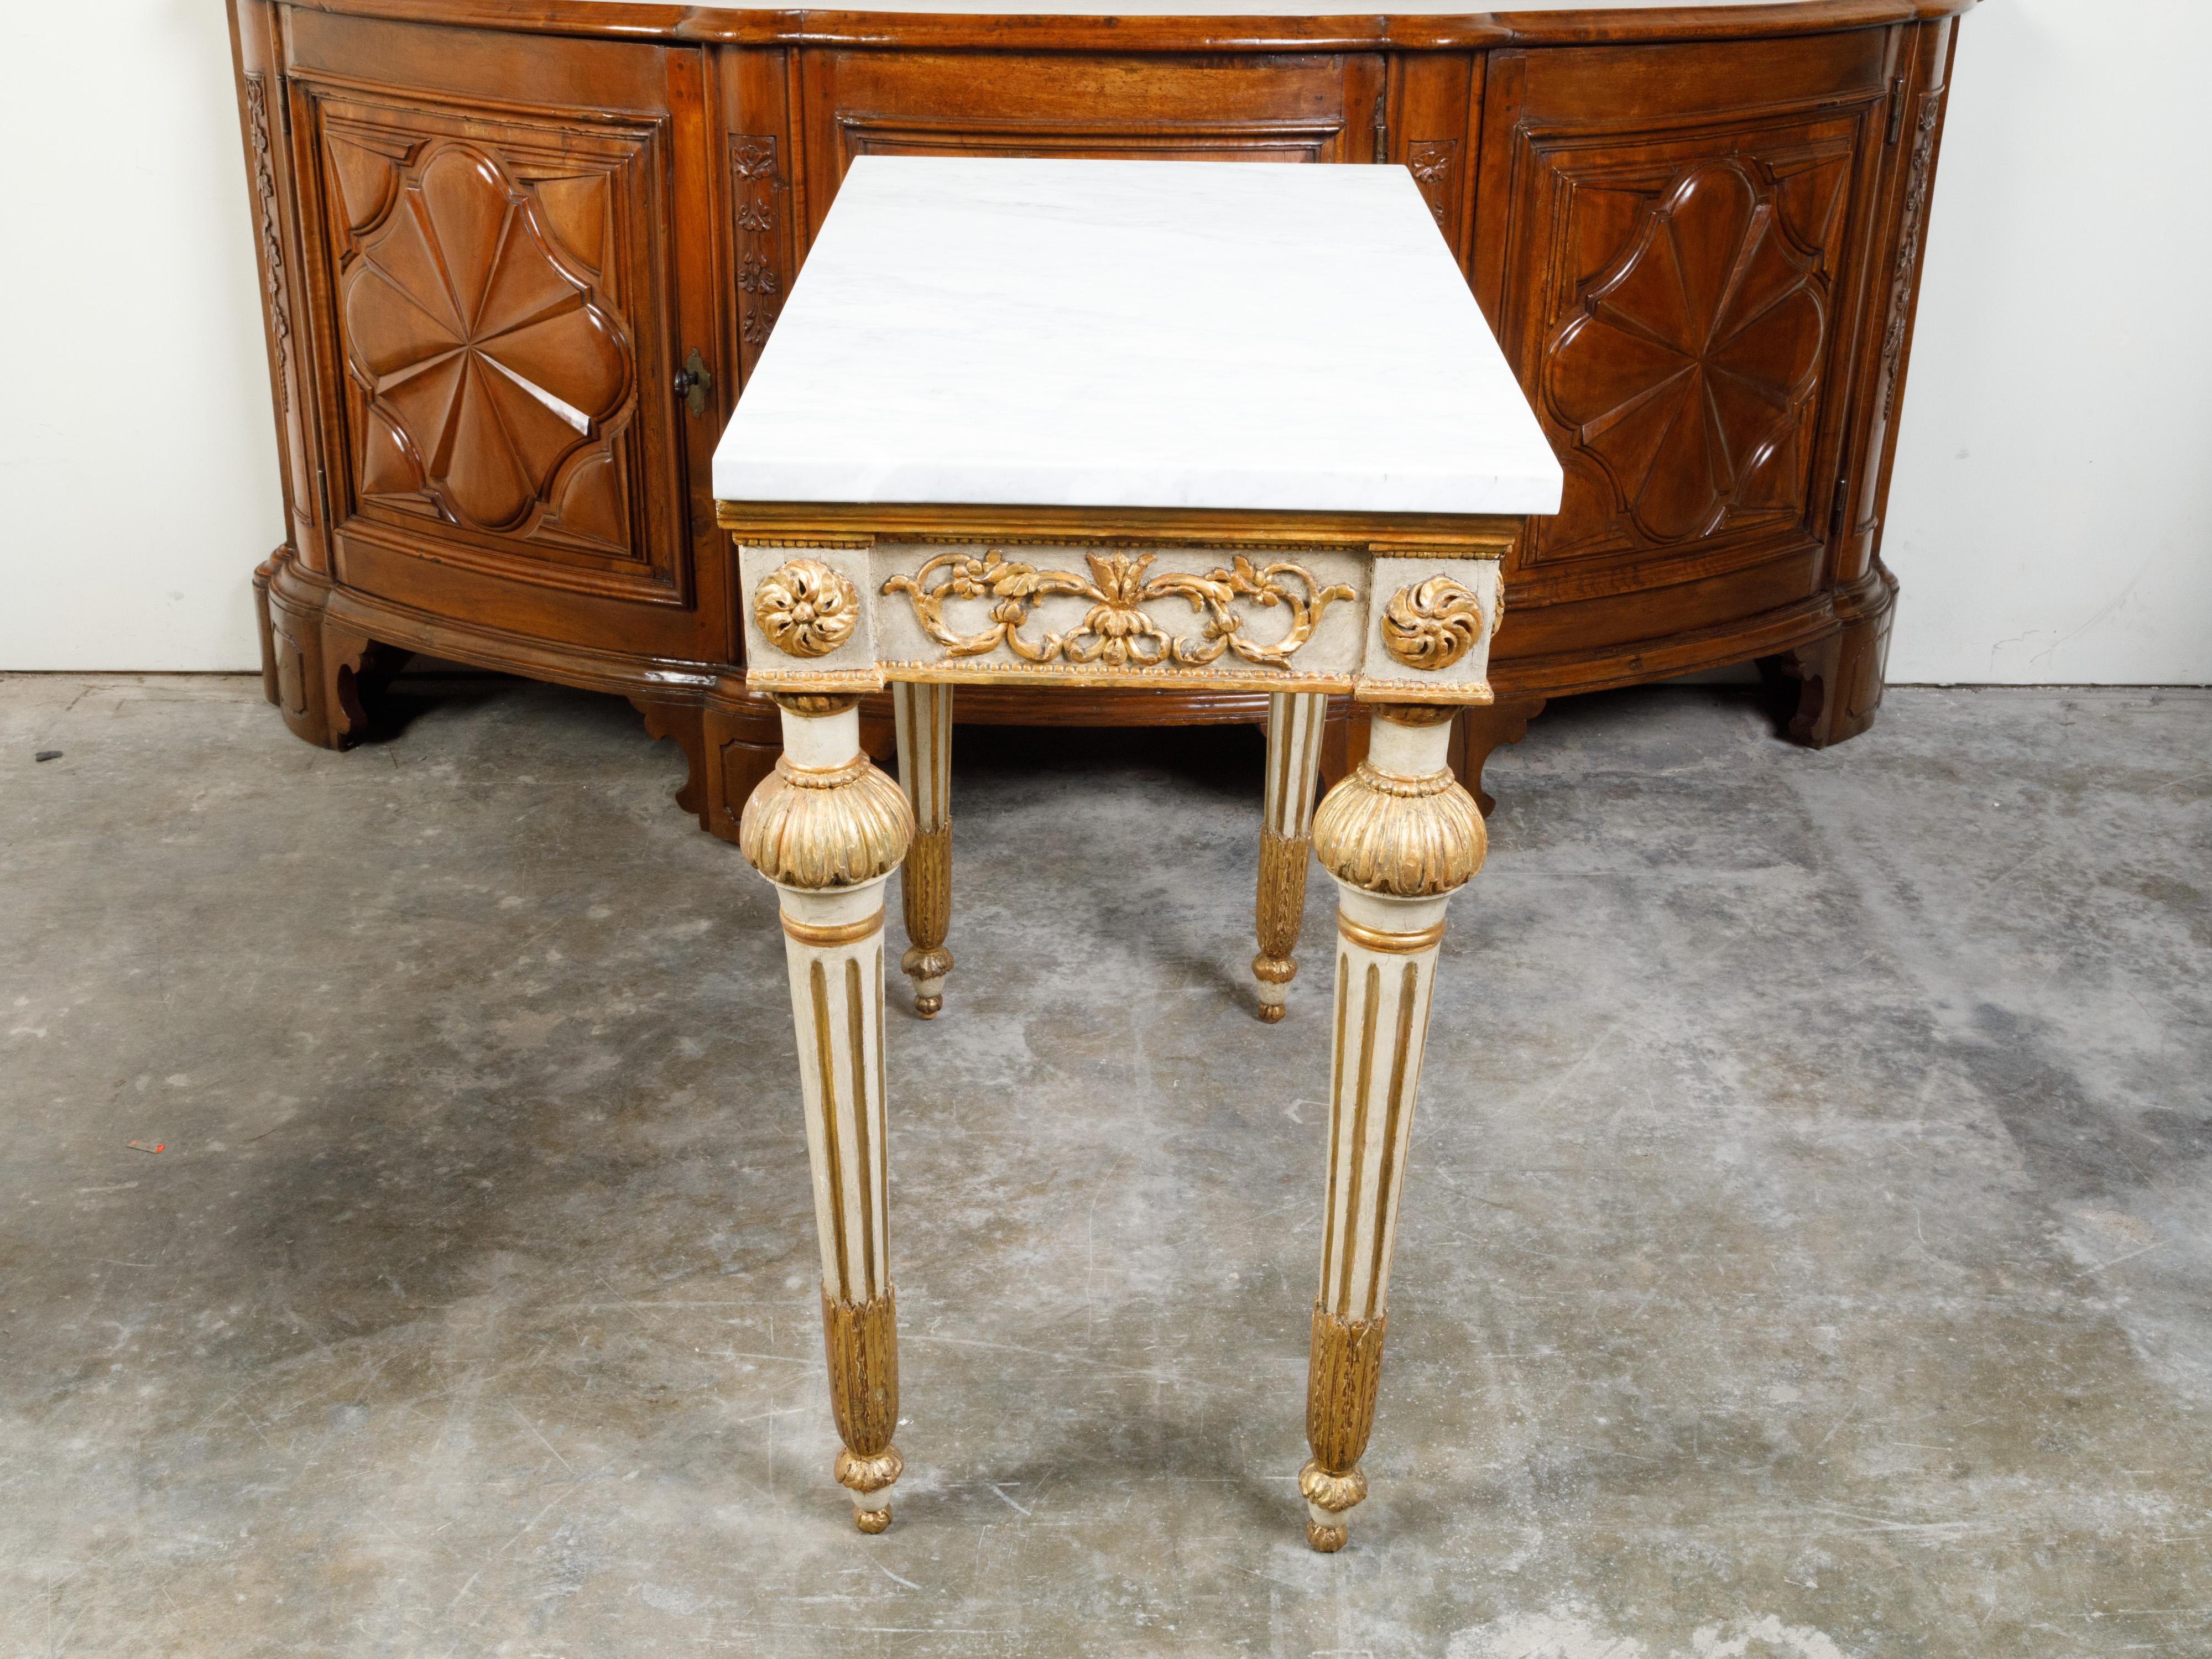 Italian 18th Century Neoclassical Carved and Gilt Console Table with Marble Top For Sale 5